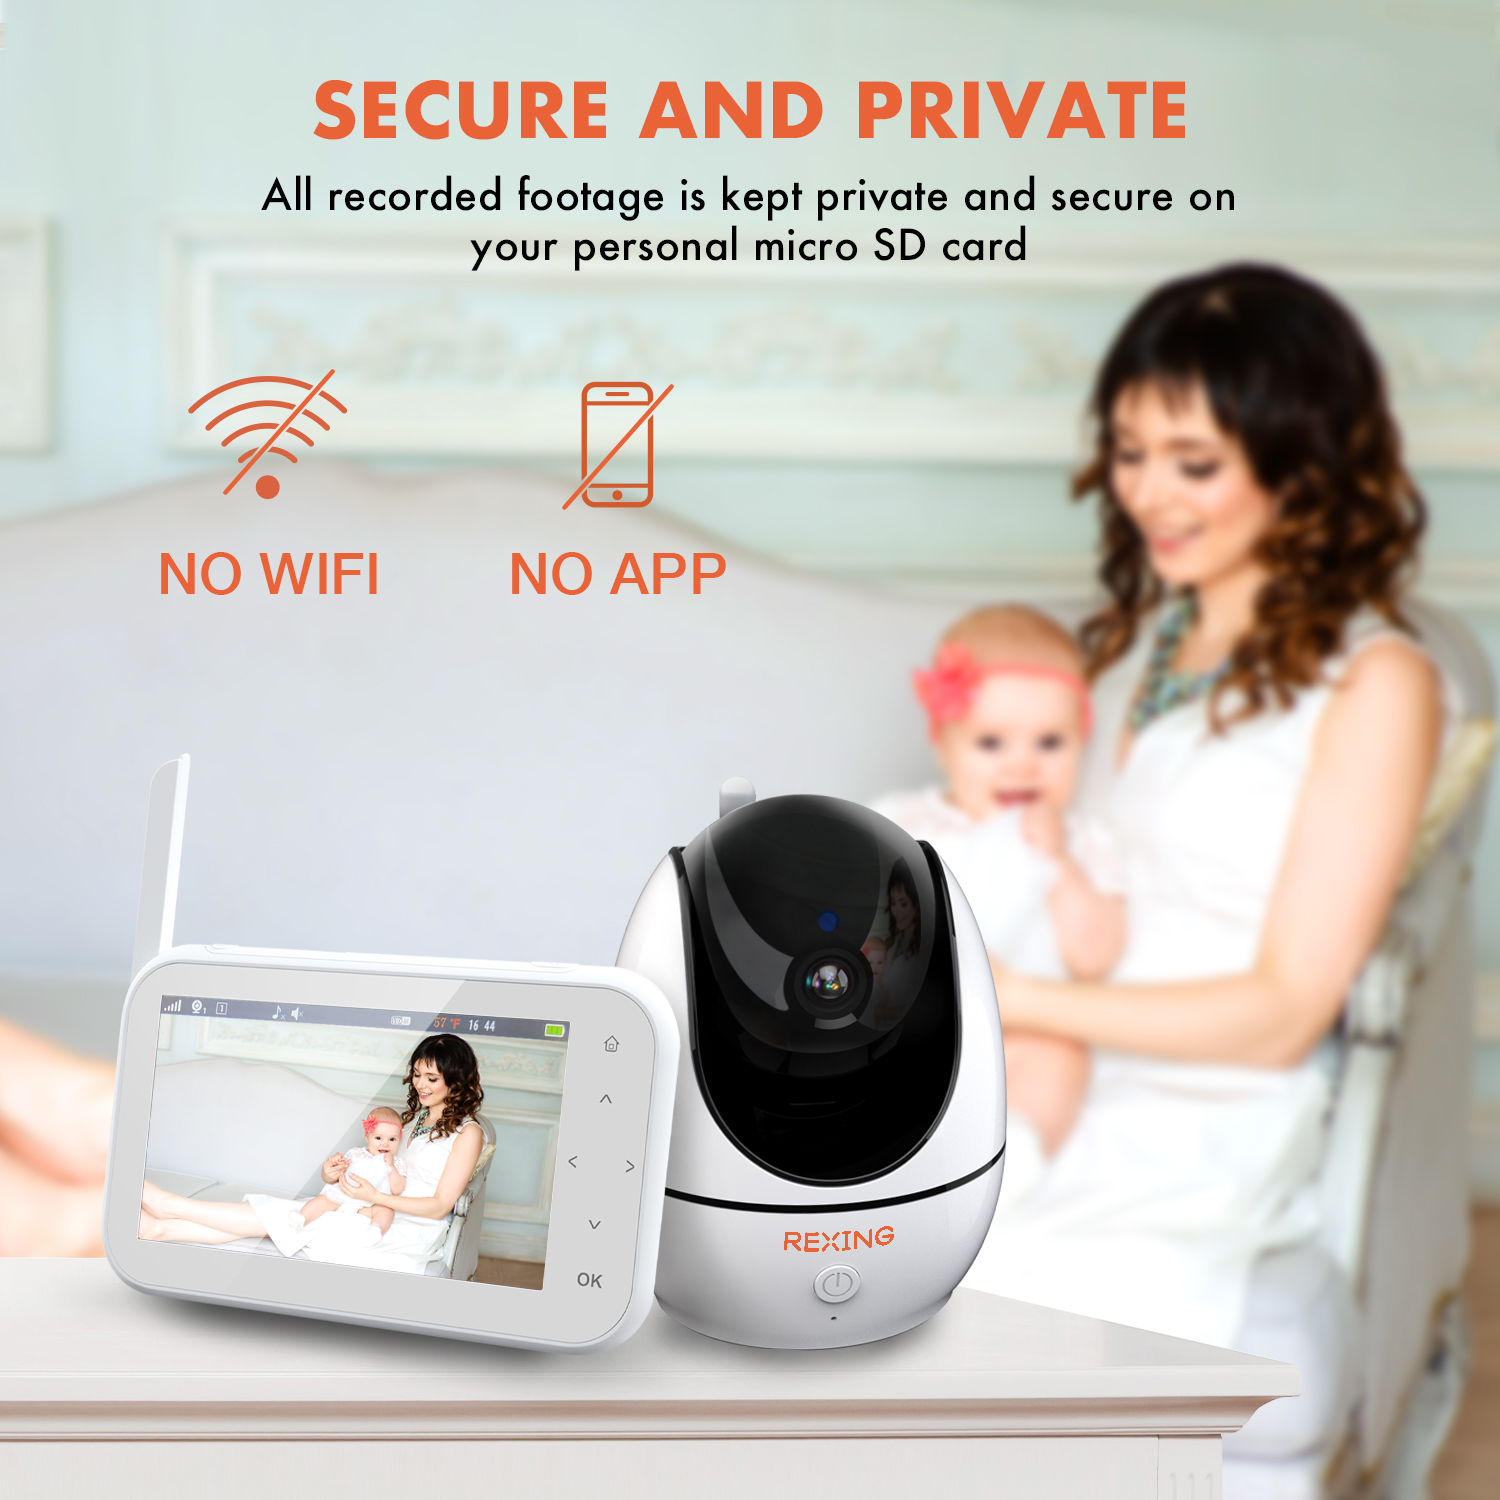 Rexing BM1 + Free Extra Add-on Baby Camera, Baby Monitor W/ Recording Capabilities 720p Video/Audio